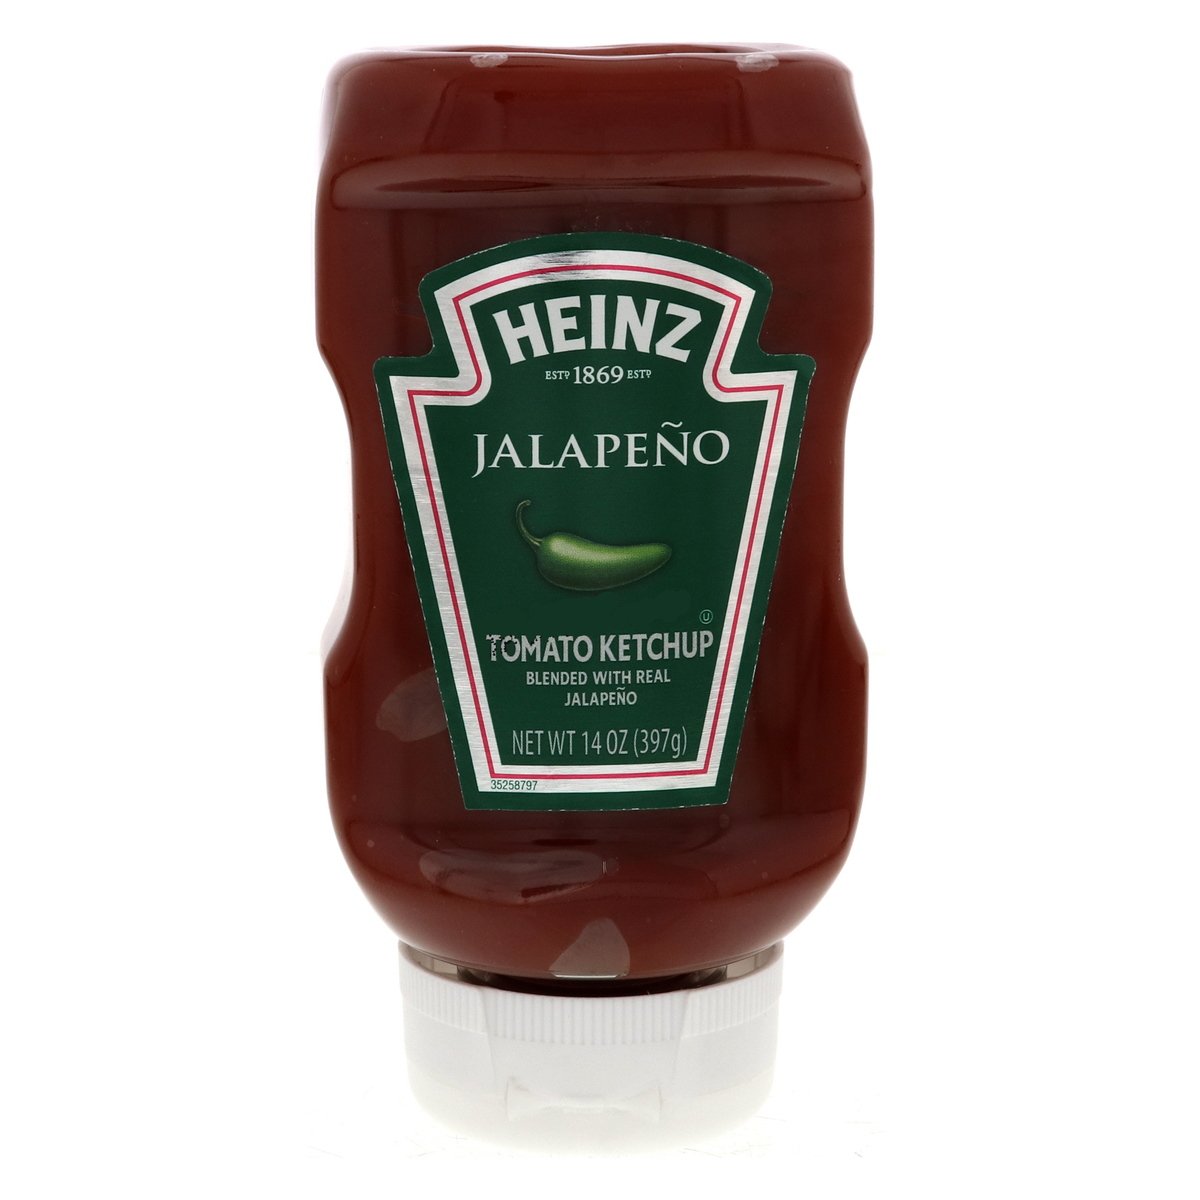 Buy Heinz Jalapeno Tomato Ketchup 397 g Online at Best Price | Ketchup | Lulu Kuwait in Kuwait